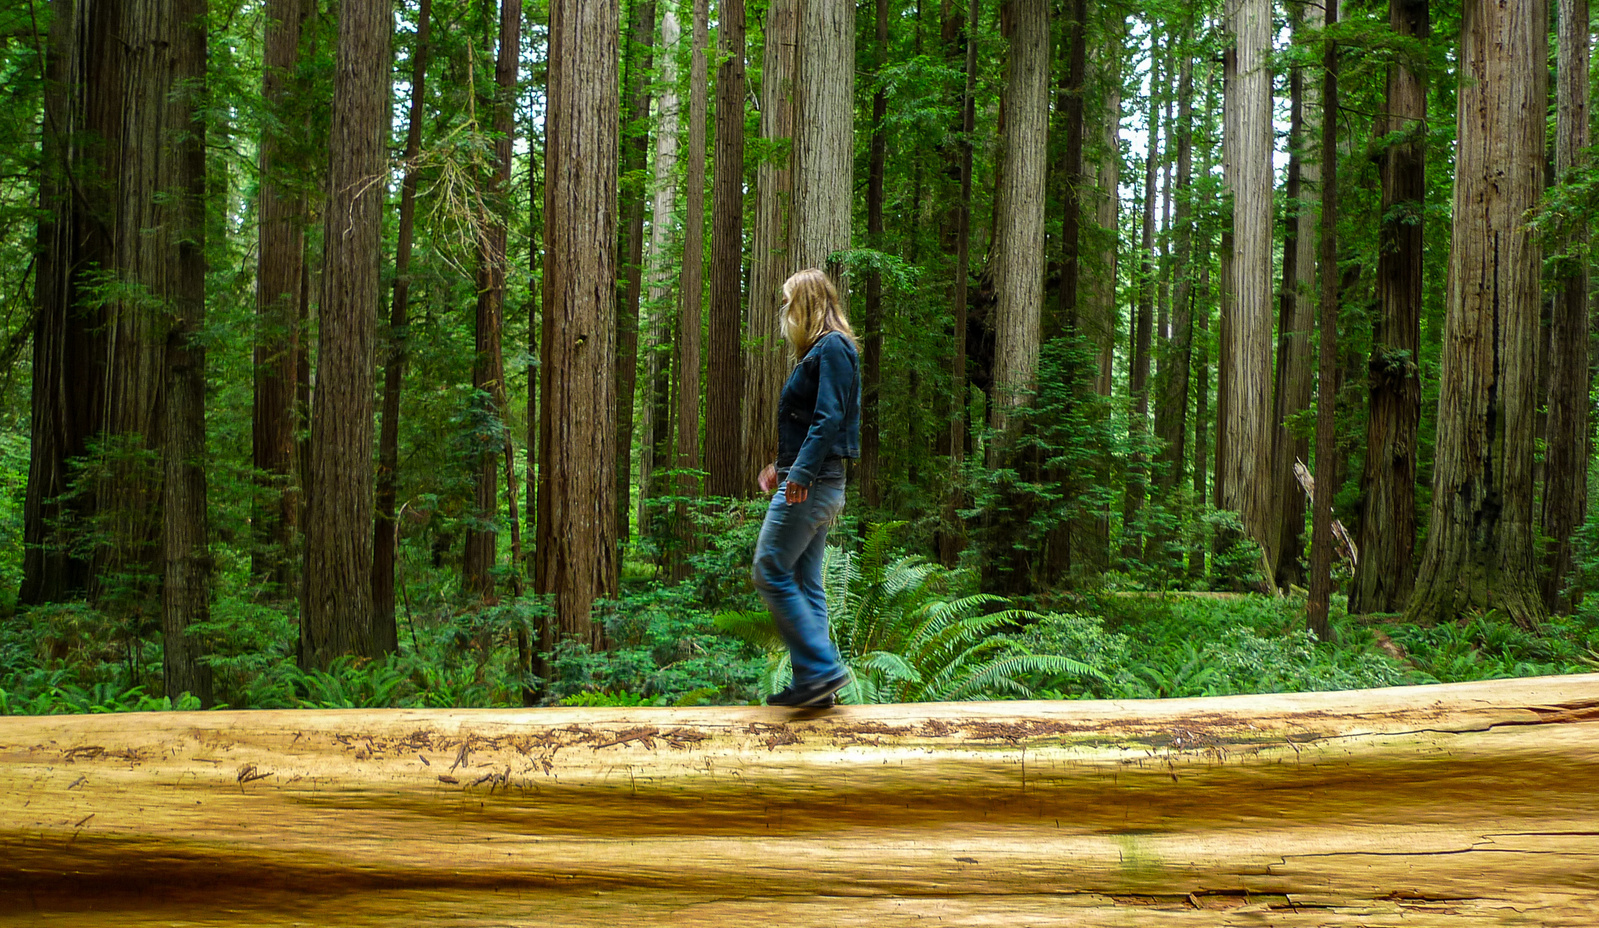 A woman traverses a fallen tree while hiking in California's Jedediah Smith Redwoods State Park.